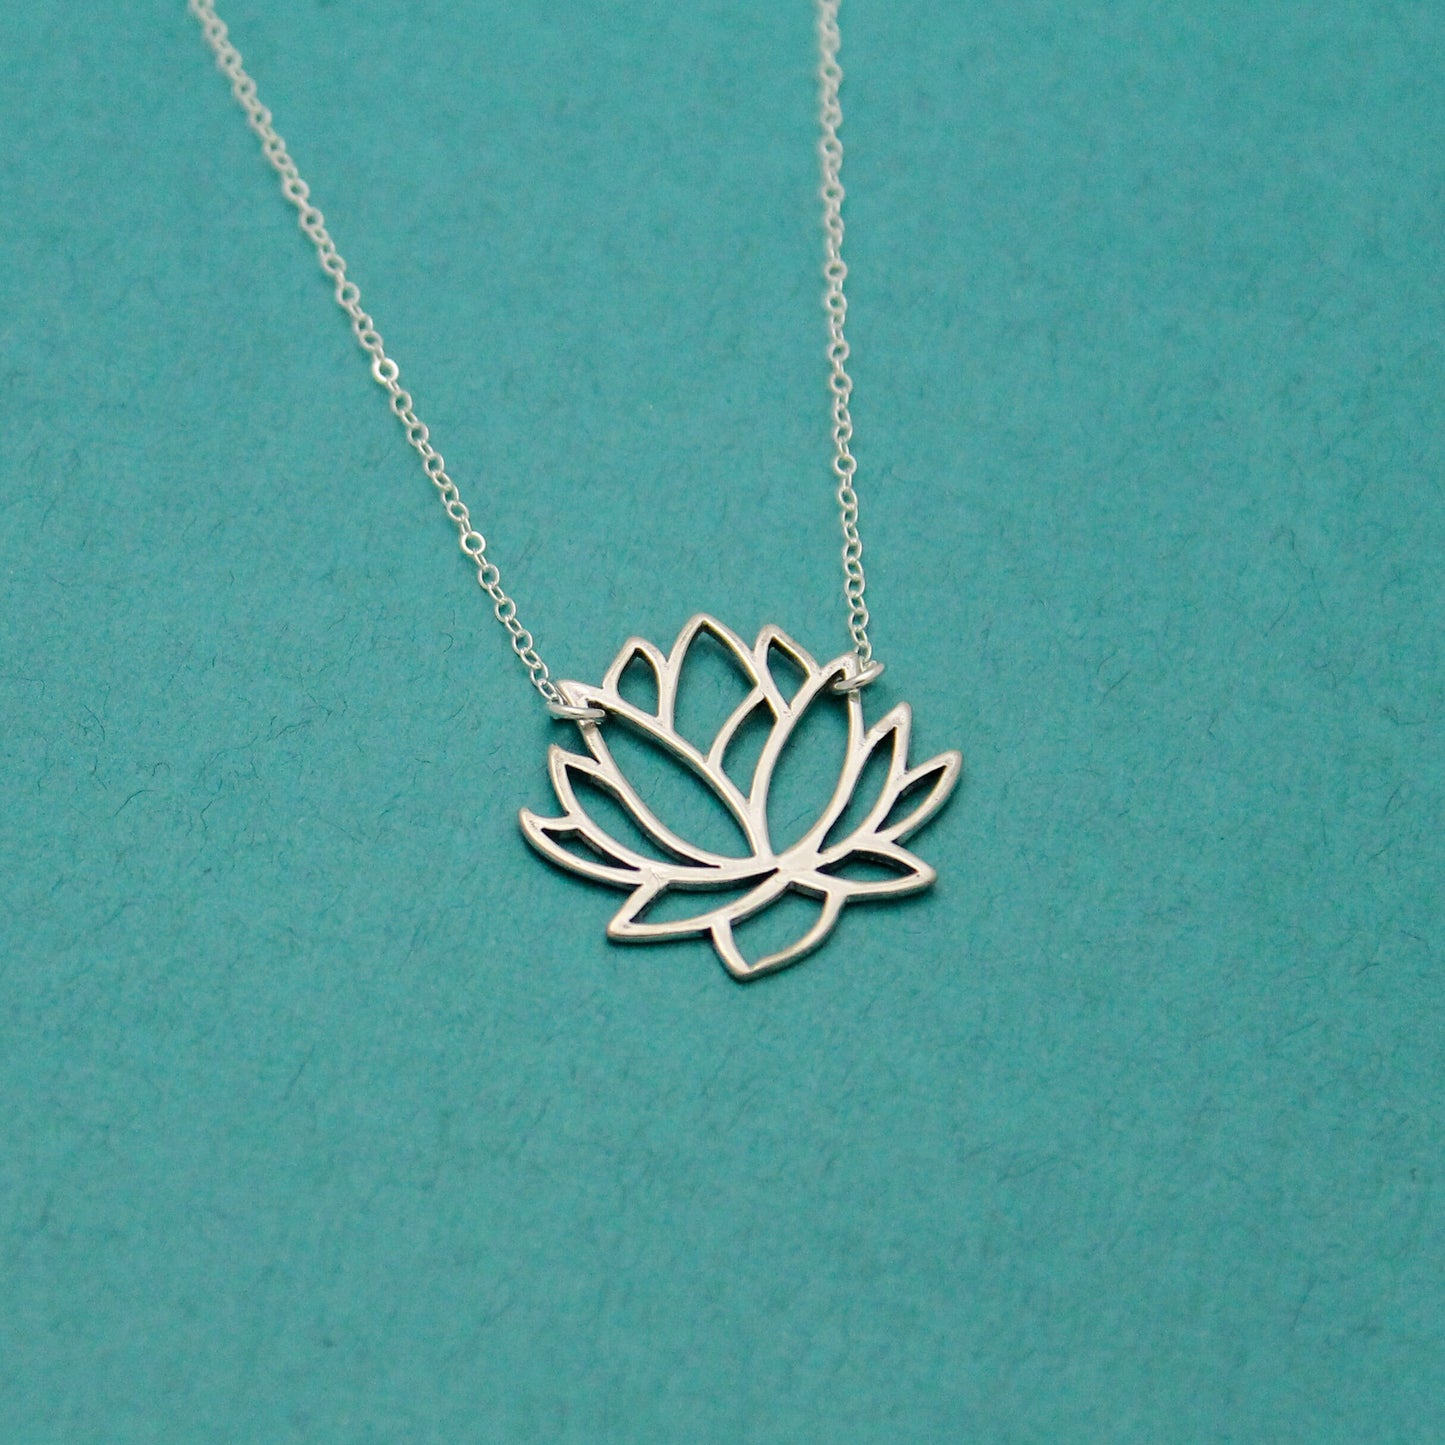 Sterling Silver LOTUS Necklace, Lotus Flower Necklace, Flower Bar Necklace, Lotus Bar Necklace, Yoga Boho Jewelry, Hand Stamped Jewelry